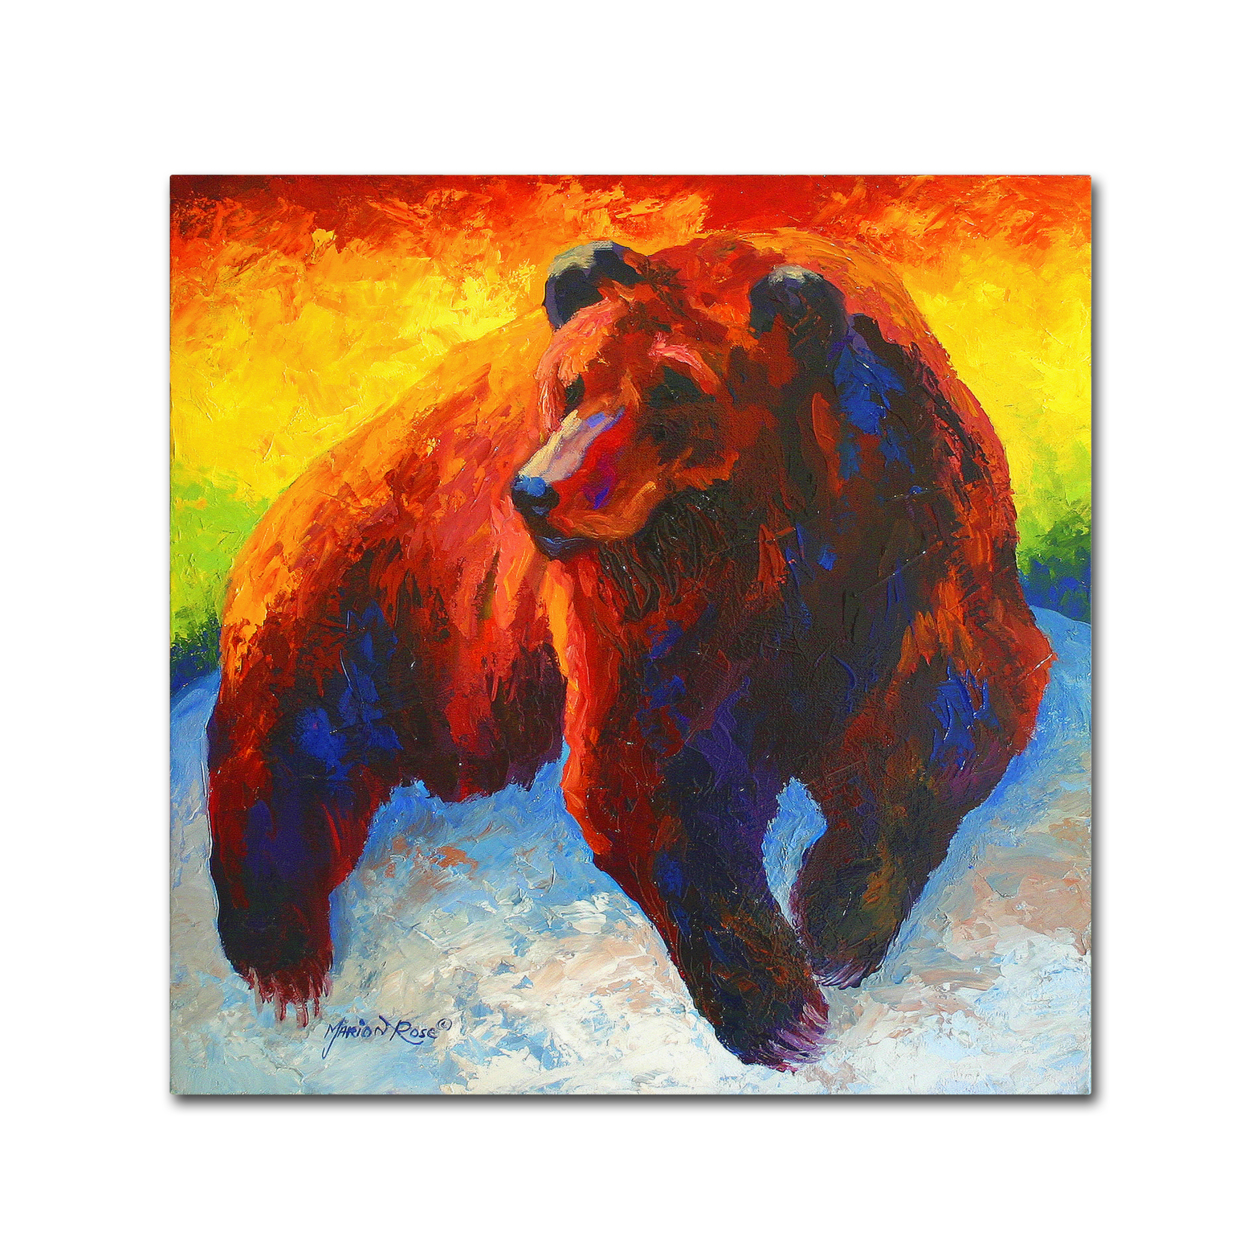 Marion Rose 'Lookout Grizz' Ready To Hang Canvas Art 35 X 35 Inches Made In USA